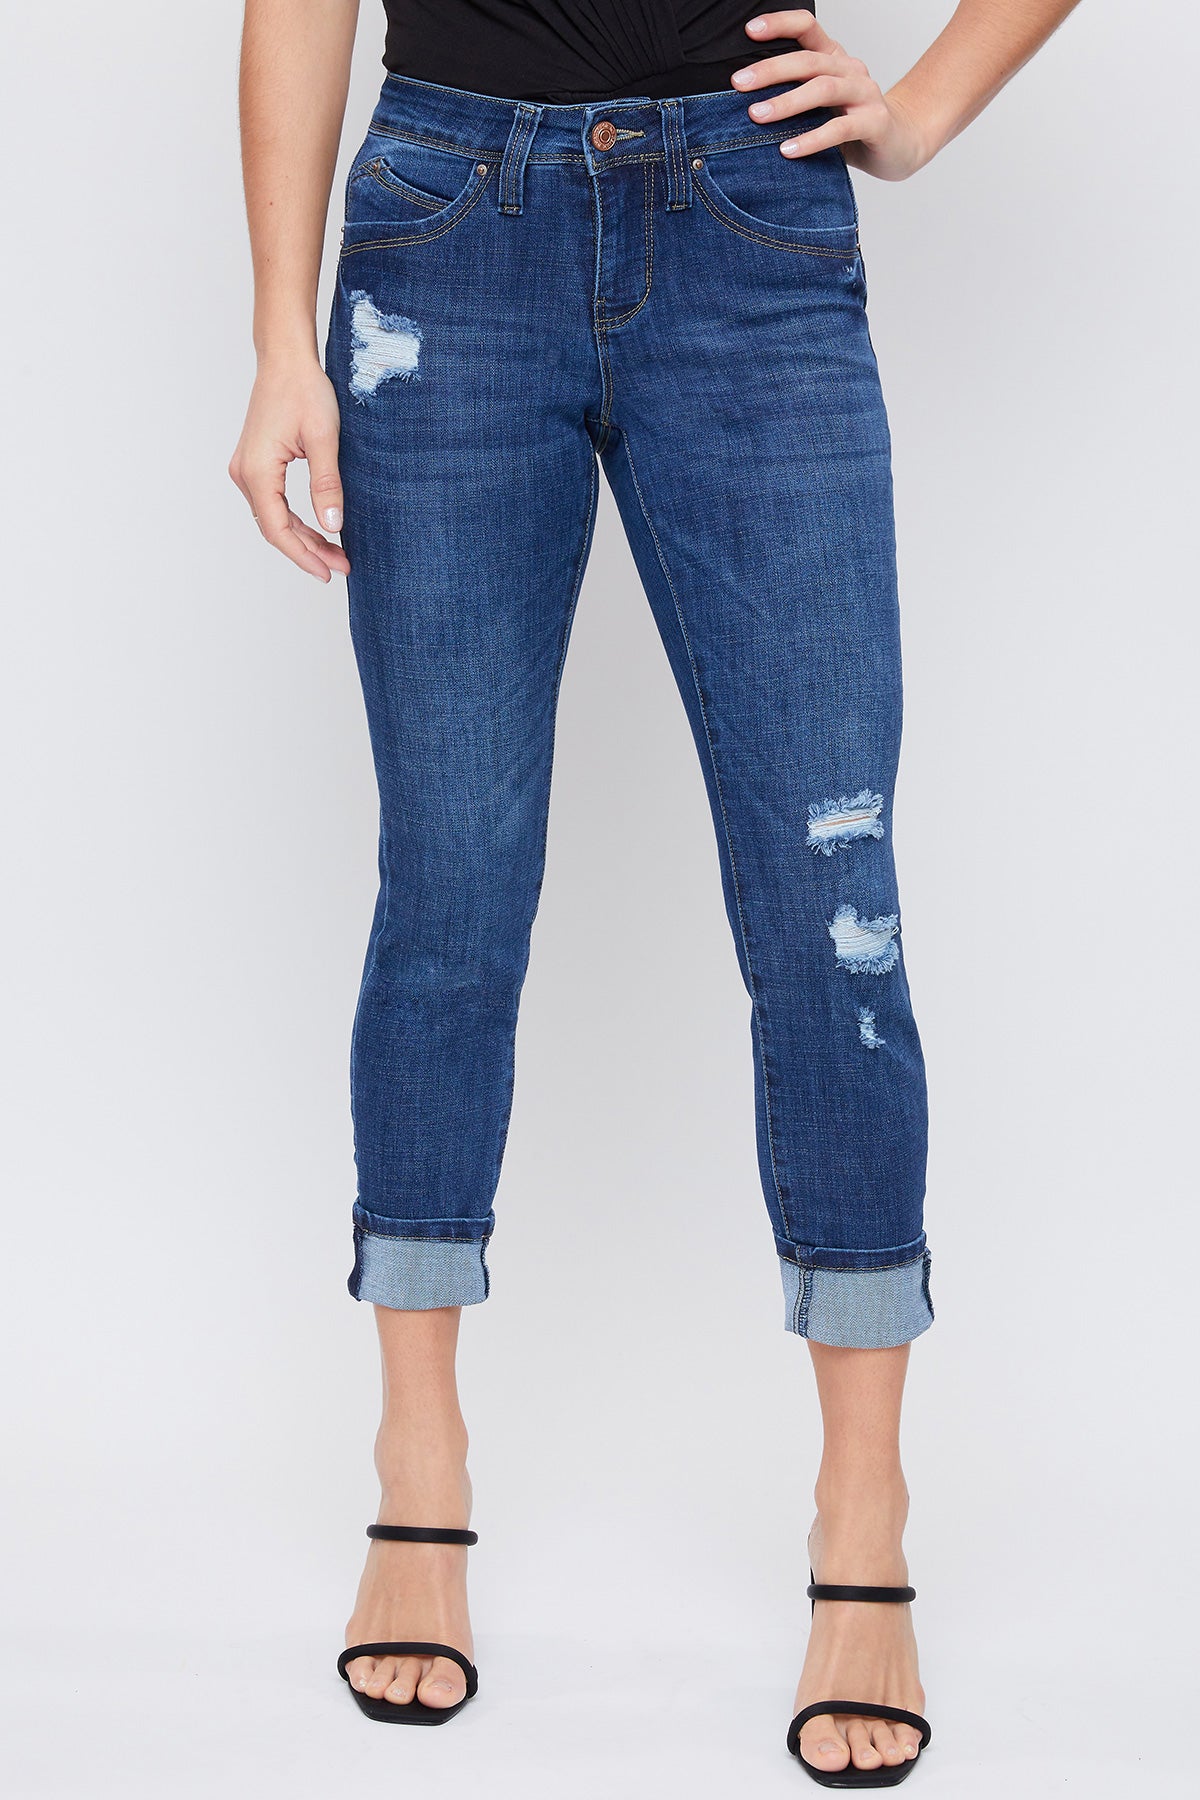 Missy Plus Size Hyperstretch Skinny Jean Pack Of 6 from Royalty for Me